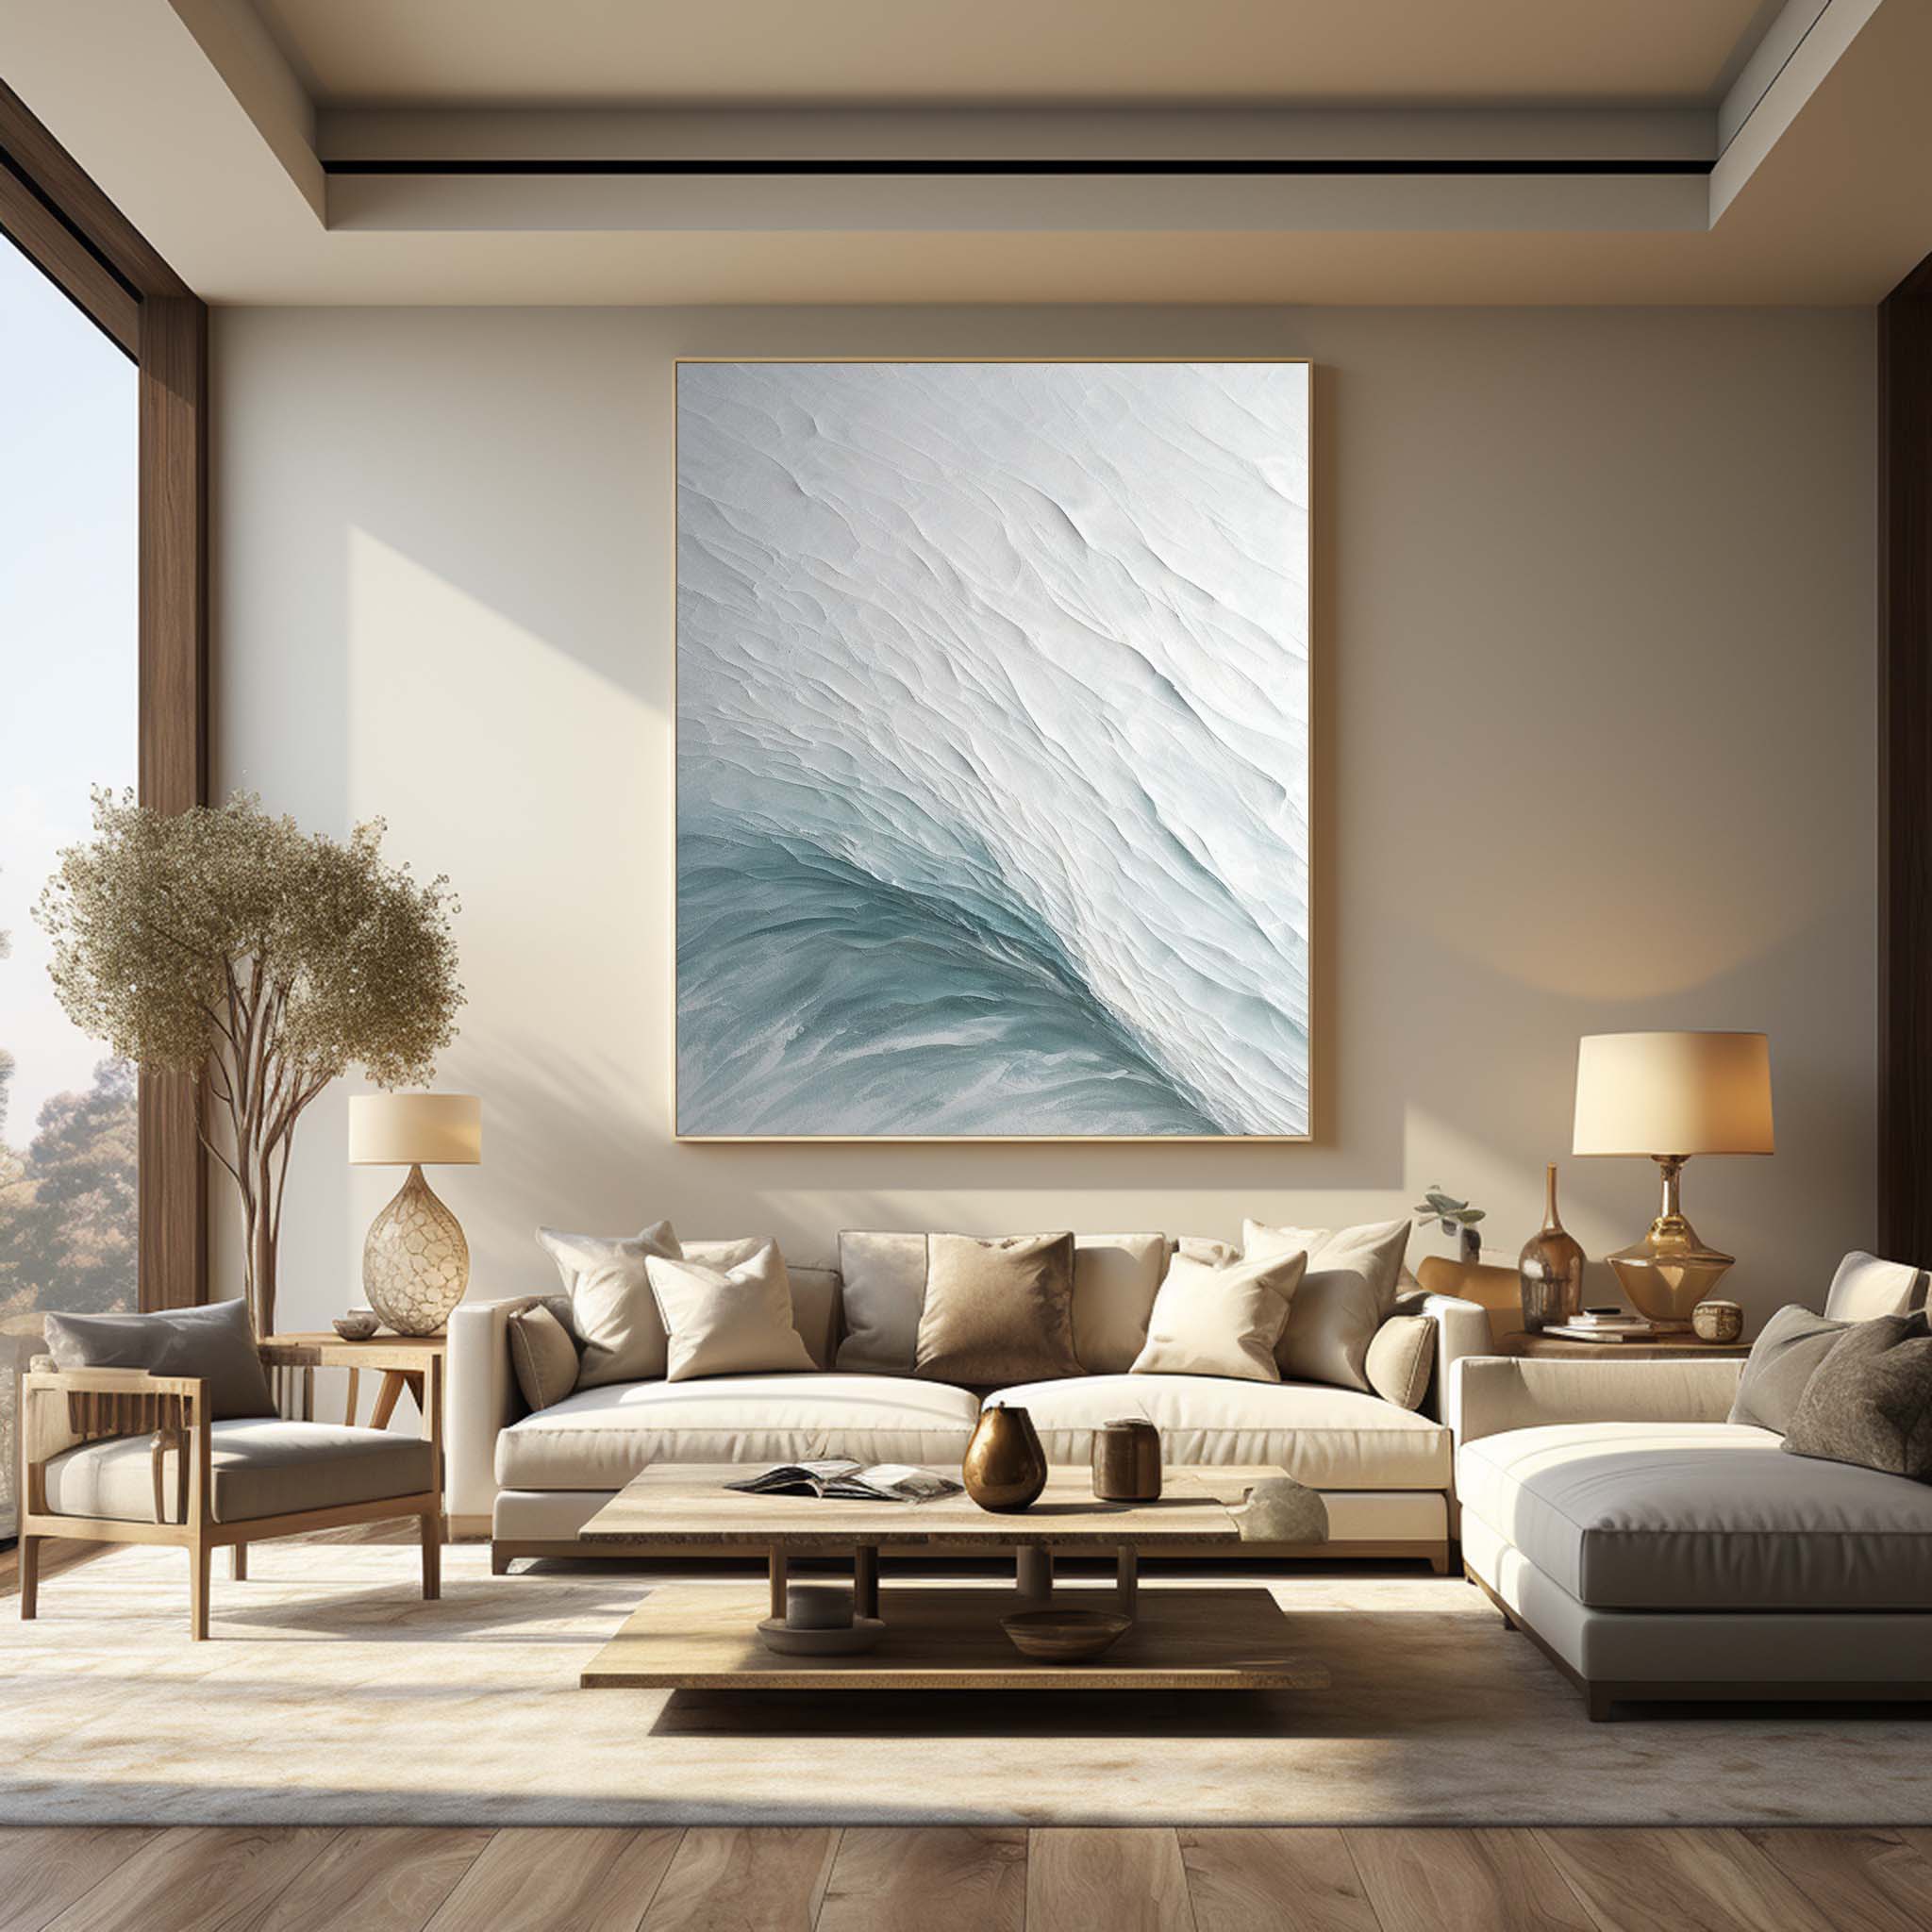 Large White Wave Texture Painting Entrance Wave Wall Art Sea View Room ...